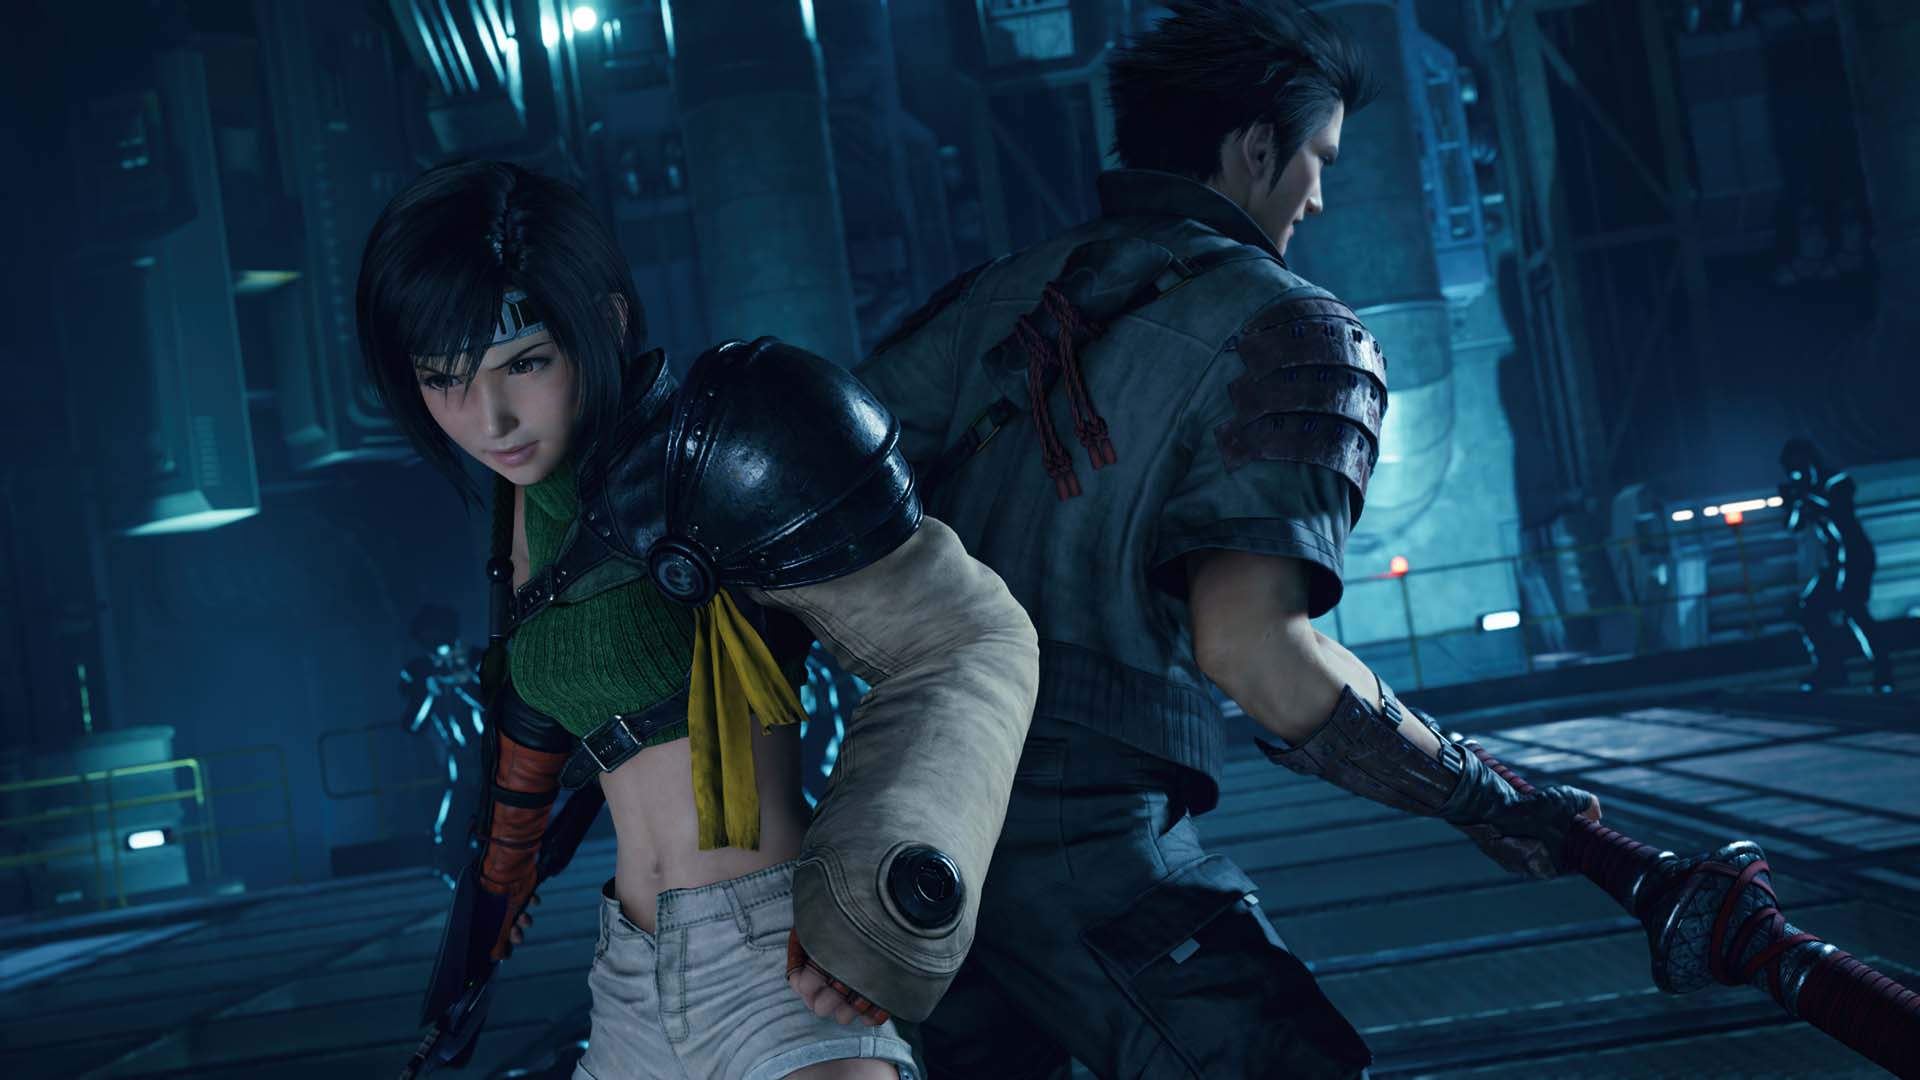 Final Fantasy VII Remake - EPISODE INTERmission (New Story Content Featuring Yuffie) DLC EU PS5 CD Key 11.29$